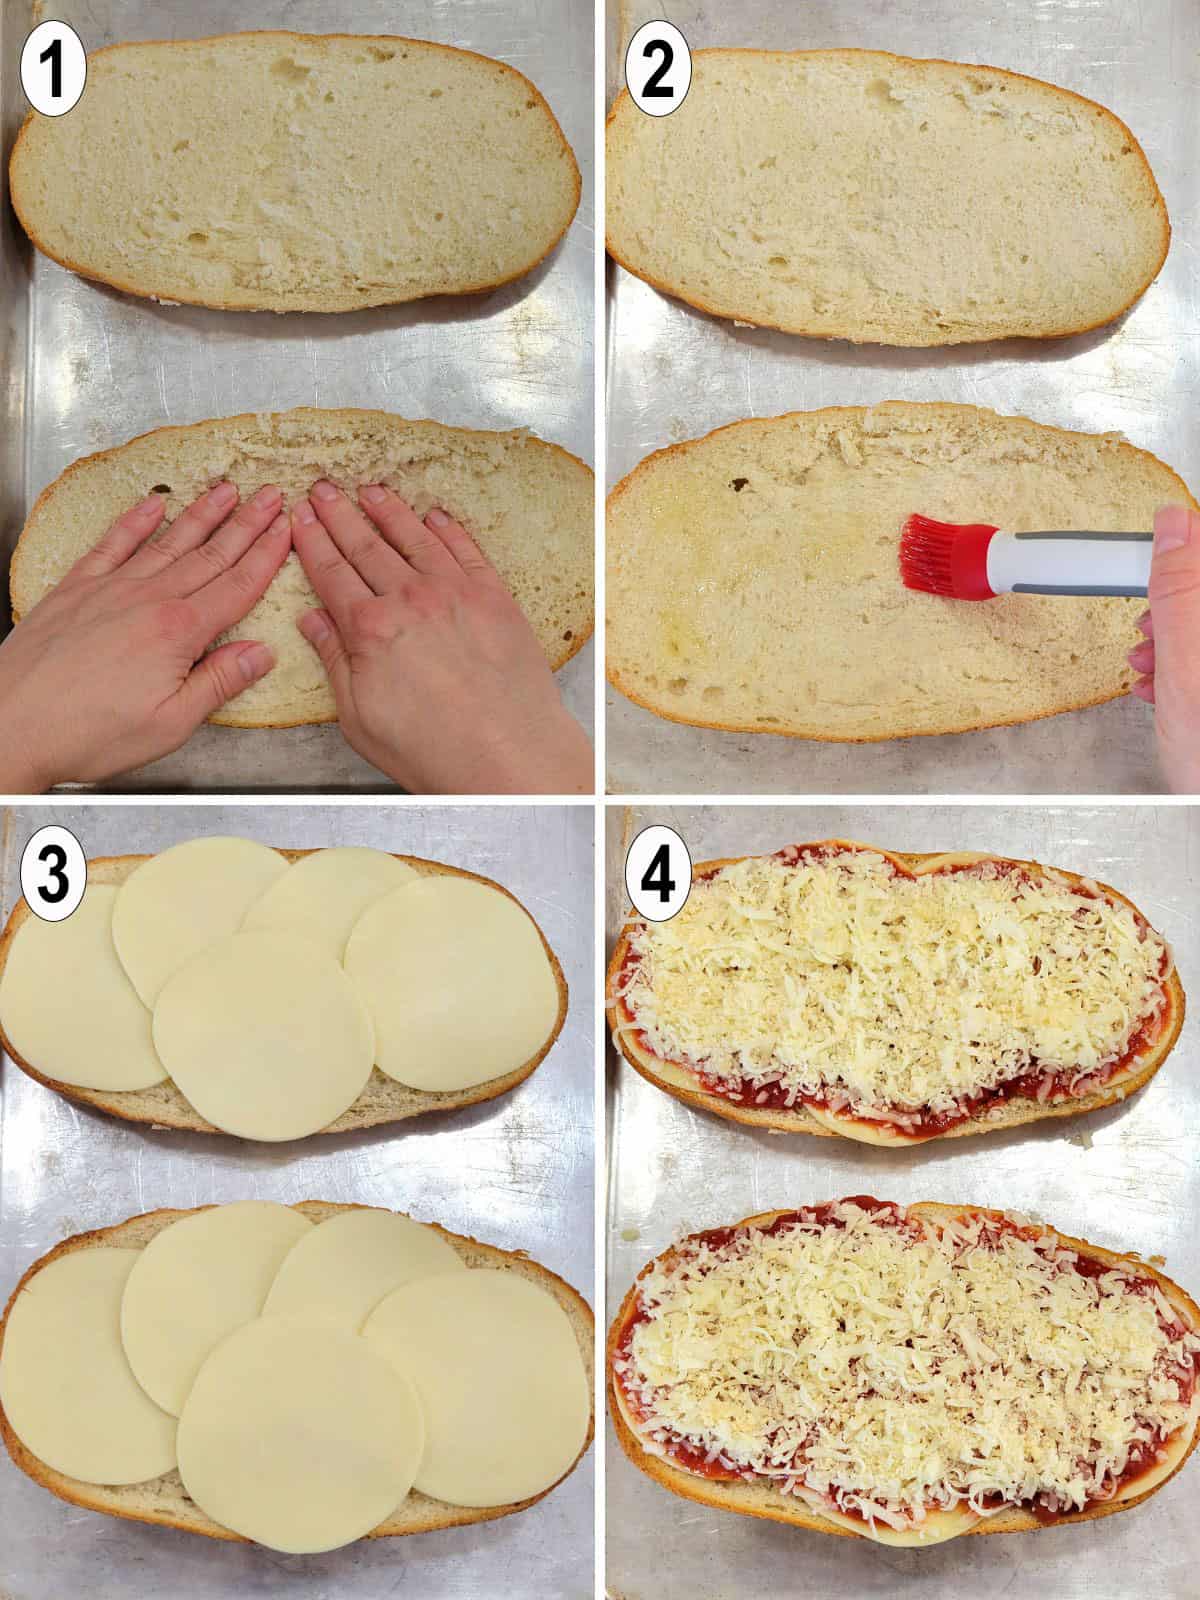 toppings put on italian bread to make a pizza